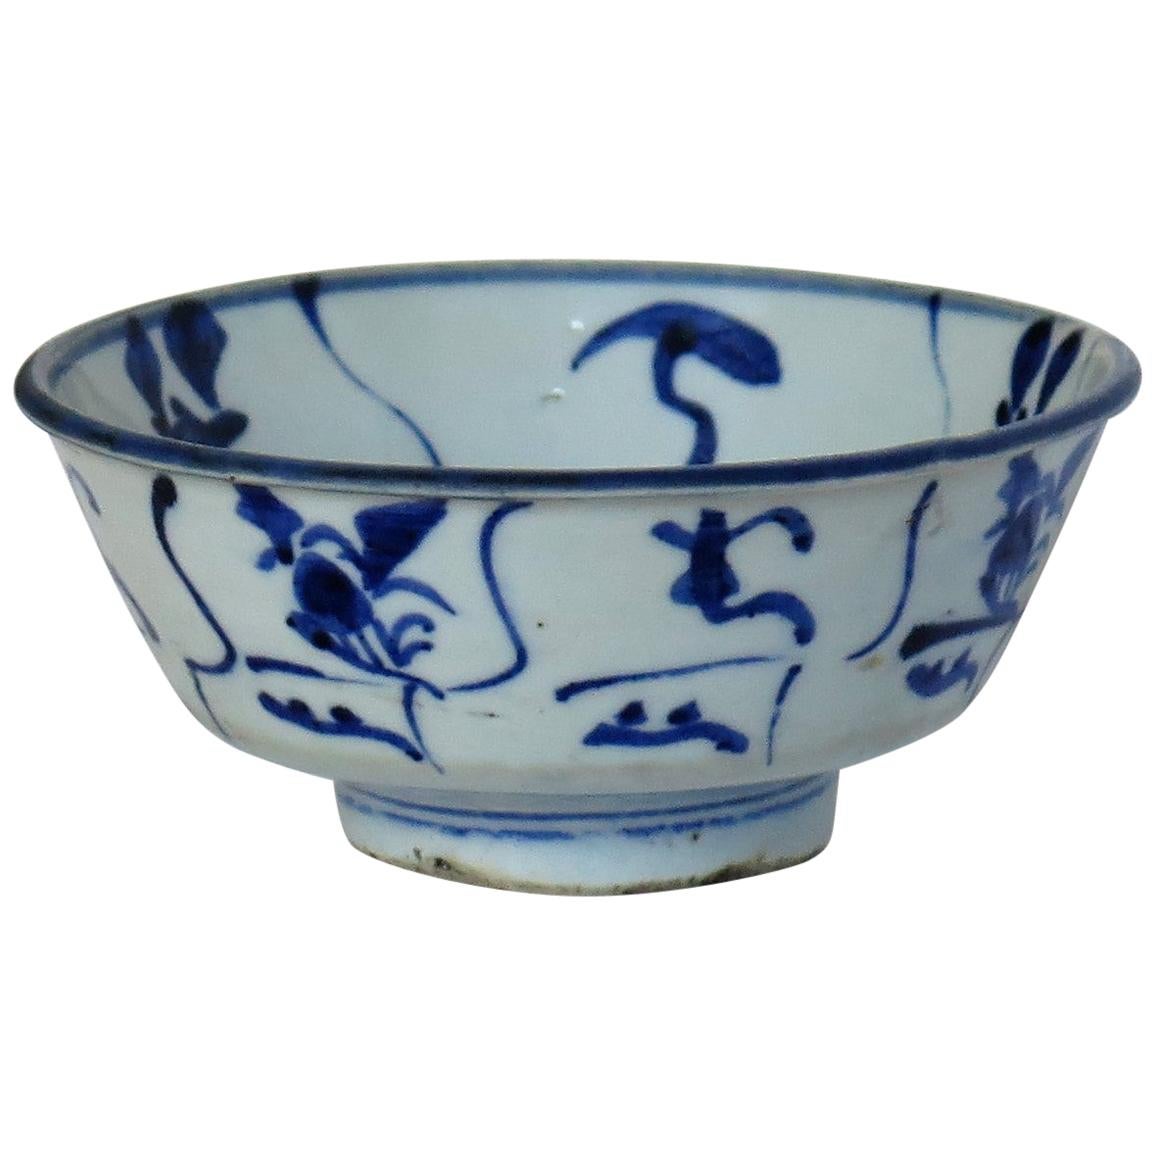 Chinese Porcelain Bowl Hand Painted Blue and White, 17th Century Ming Export